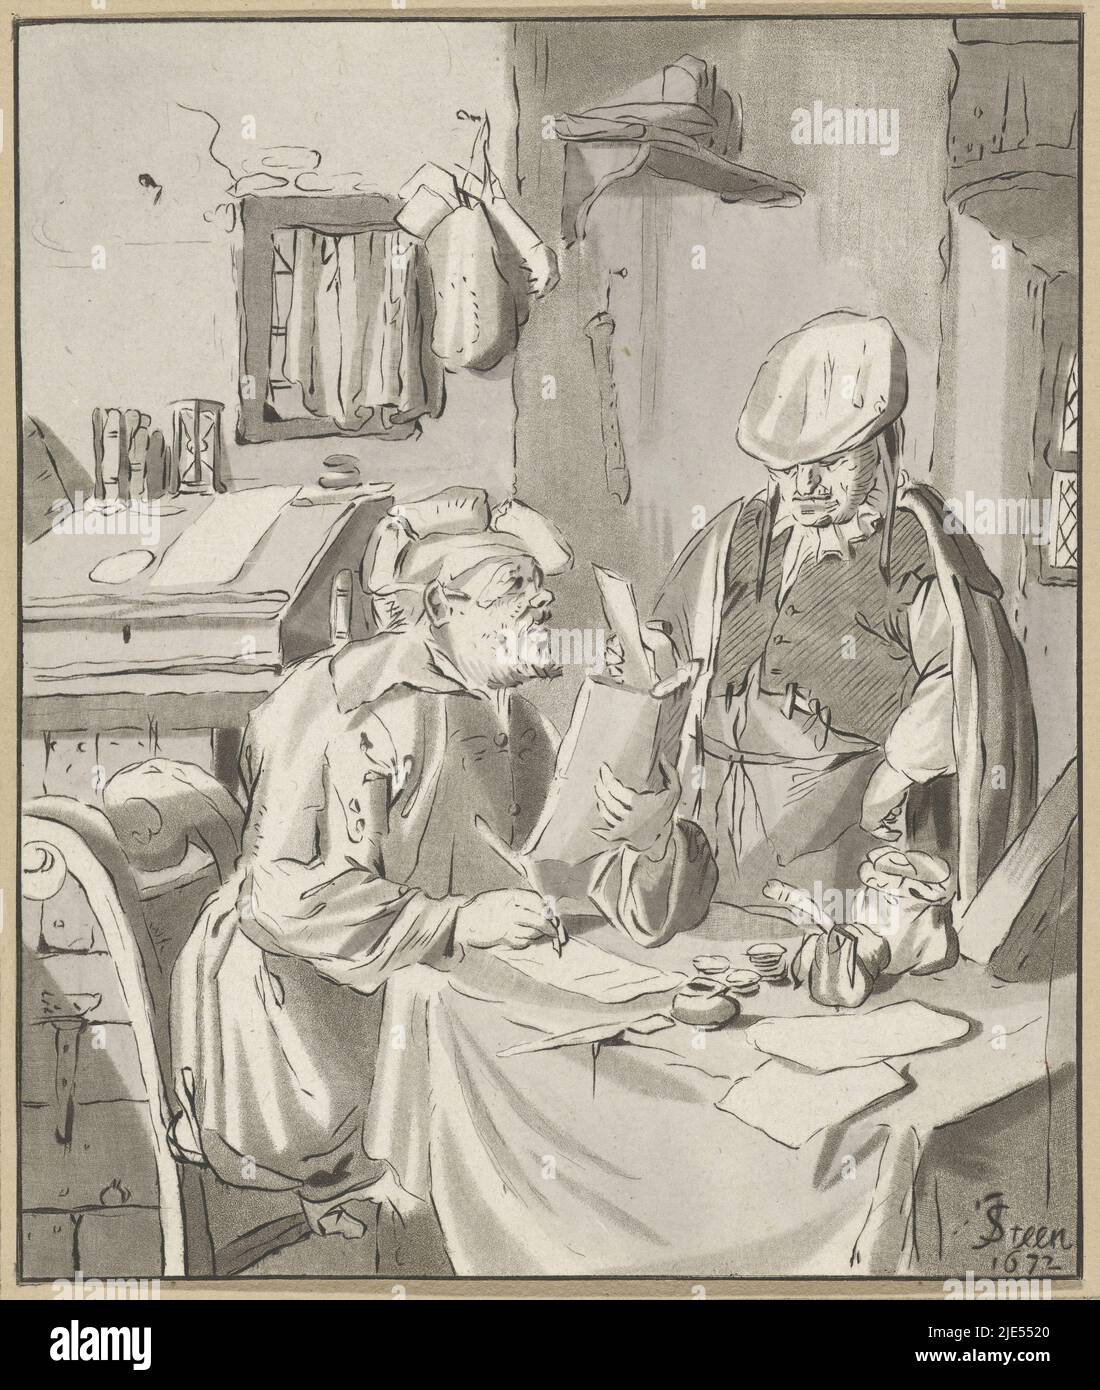 A man sitting at a table writes a letter. Next to him is a man holding a letter, Writer of a letter Recipient, Cornelis Ploos van Amstel, print maker: Bernhard Schreuder, intermediary draughtsman: Jan Havicksz. Steen, (mentioned on object), Amsterdam, 1777 - 1786, paper, etching, h 156 mm × w 131 mm Stock Photo